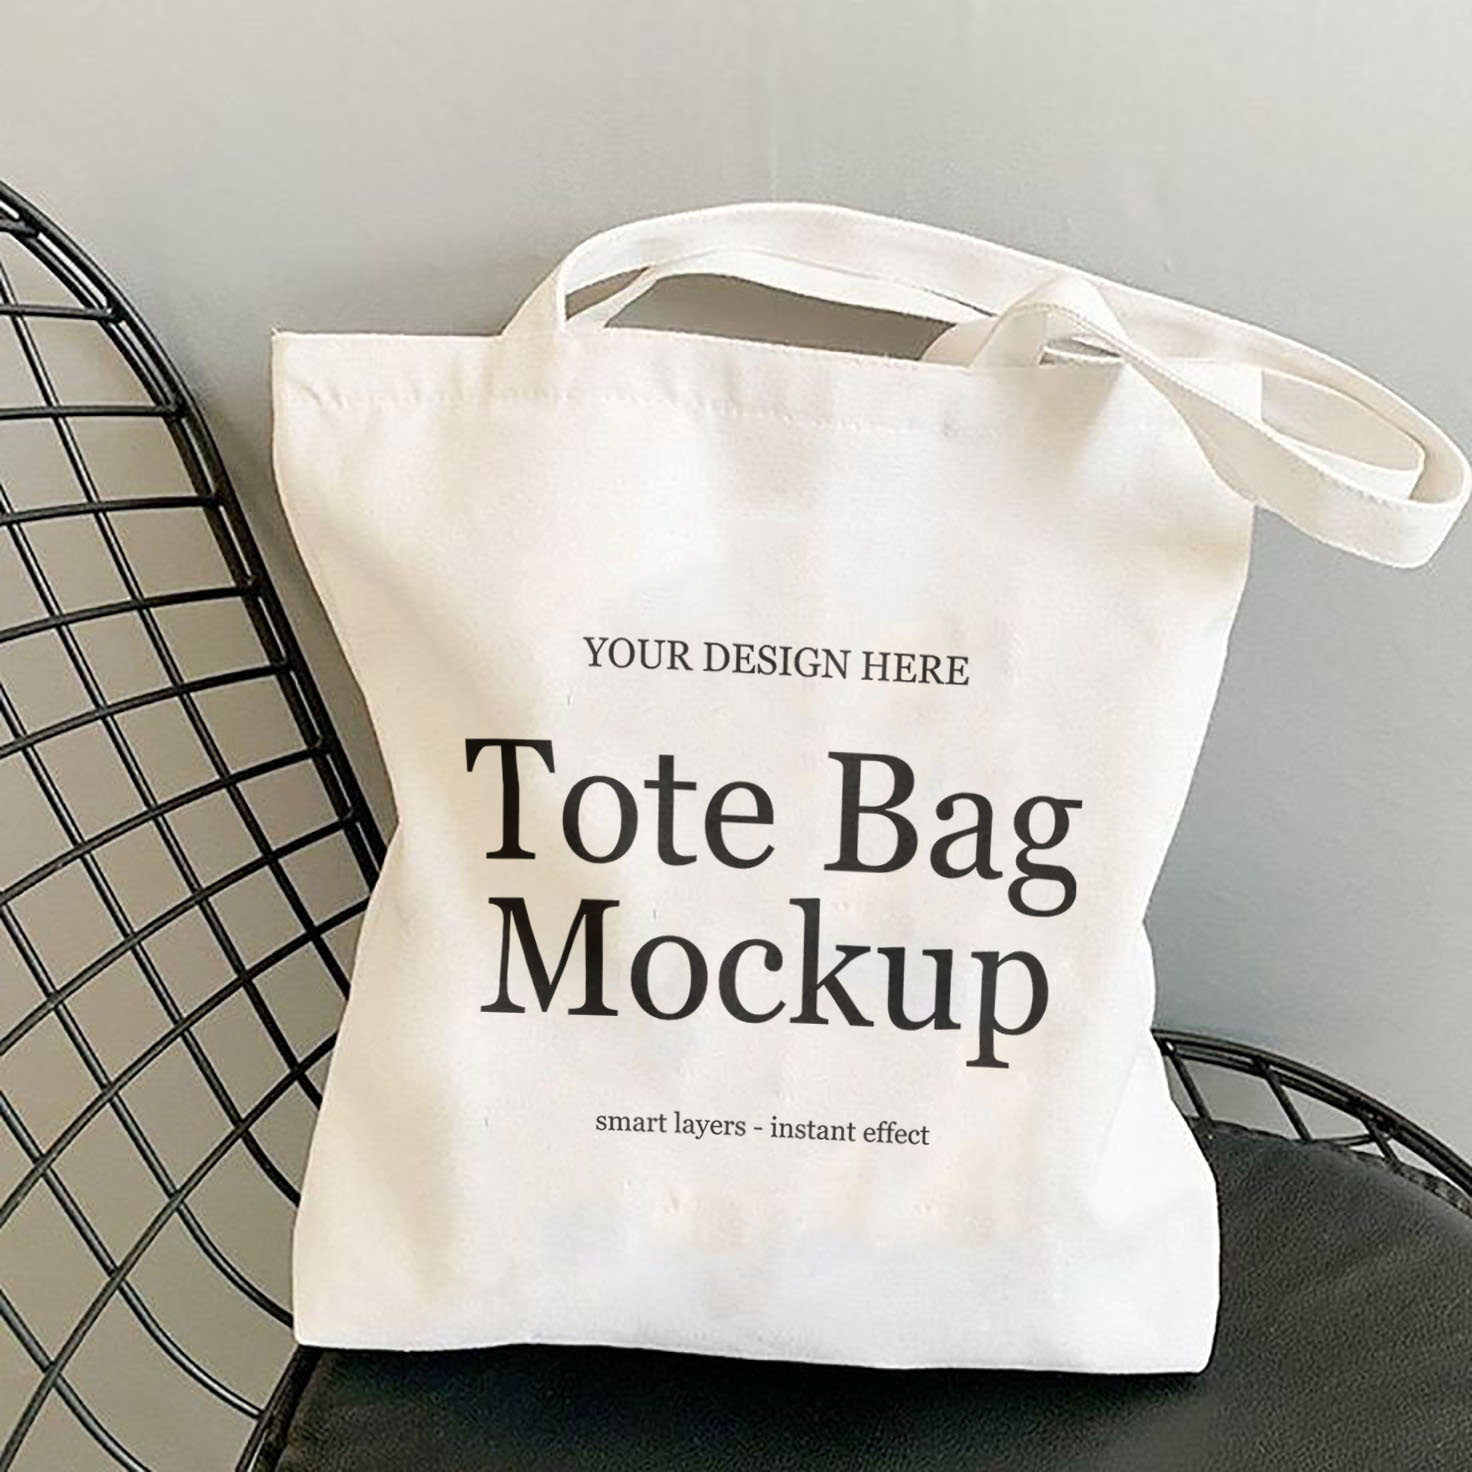 Free PSD White Canvas Tote Bag Mockup Download 82 by diosvolt on DeviantArt